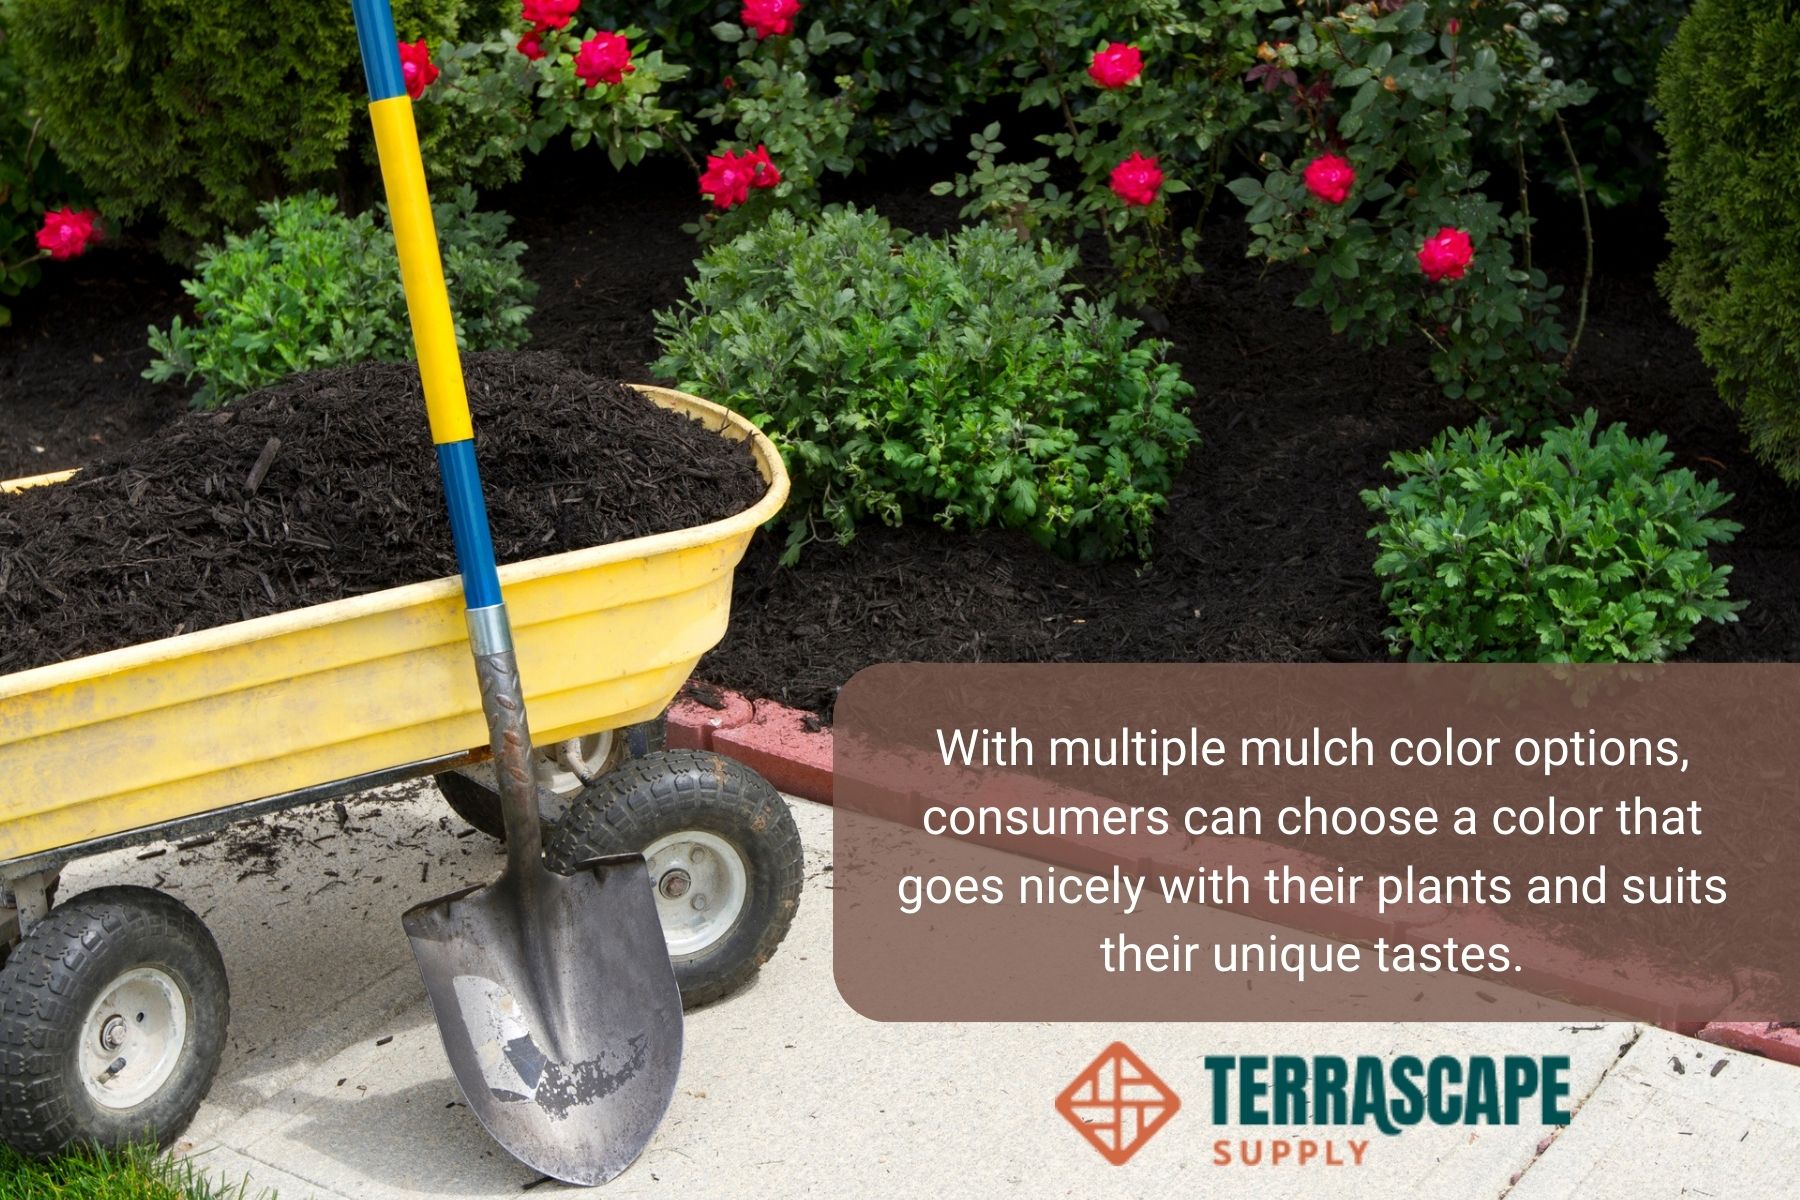 Multiple mulch color options